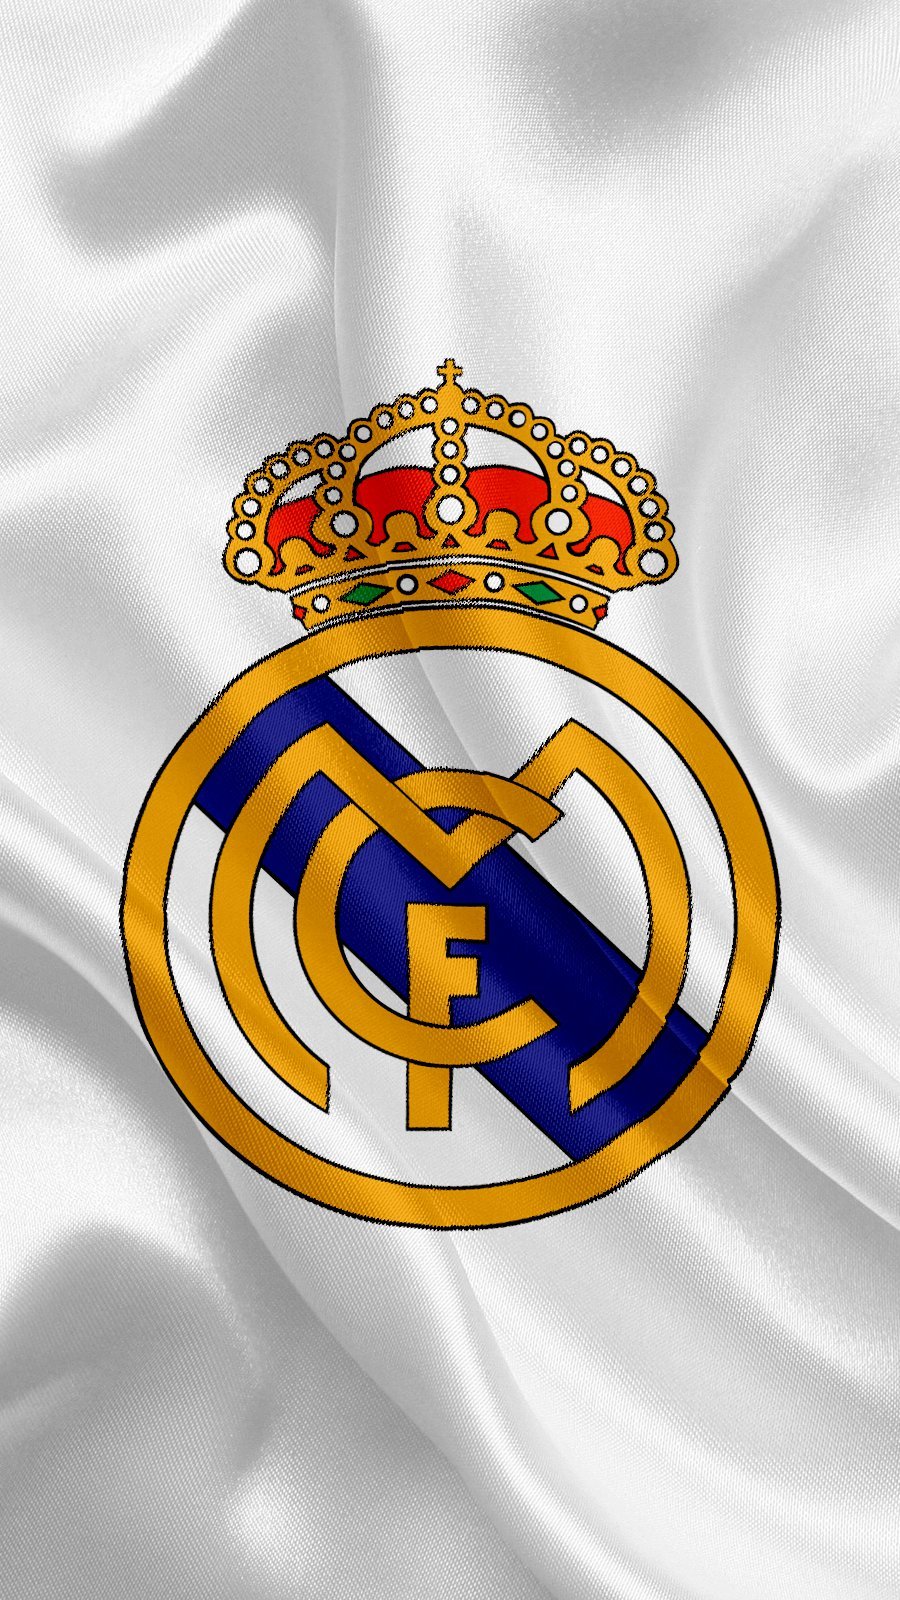 Real Madrids logo  Real madrid wallpapers Real madrid logo wallpapers  Real madrid logo